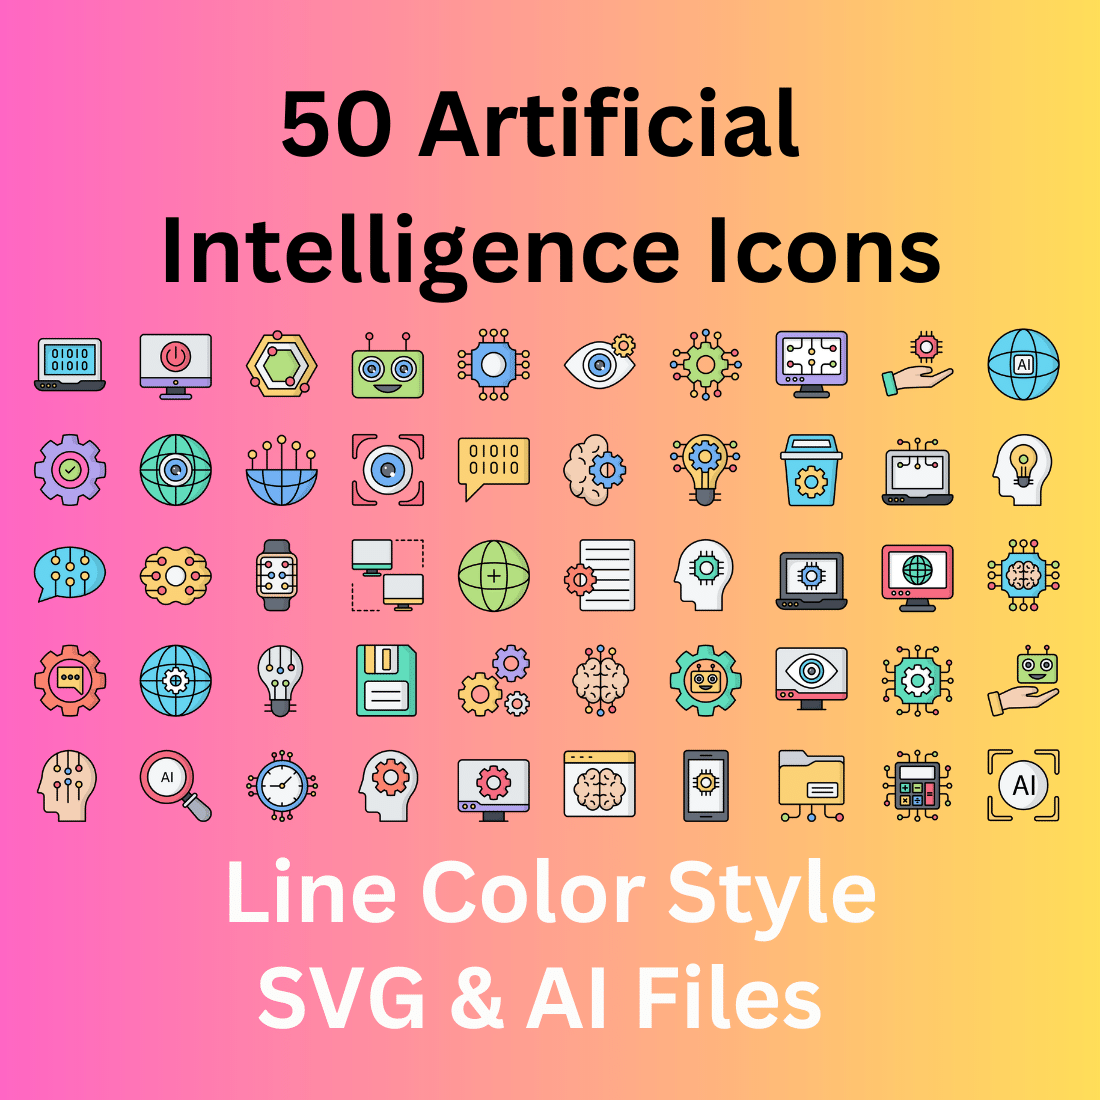 Artificial Intelligence Icon Set 50 Line Color Icons - SVG And AI cover image.